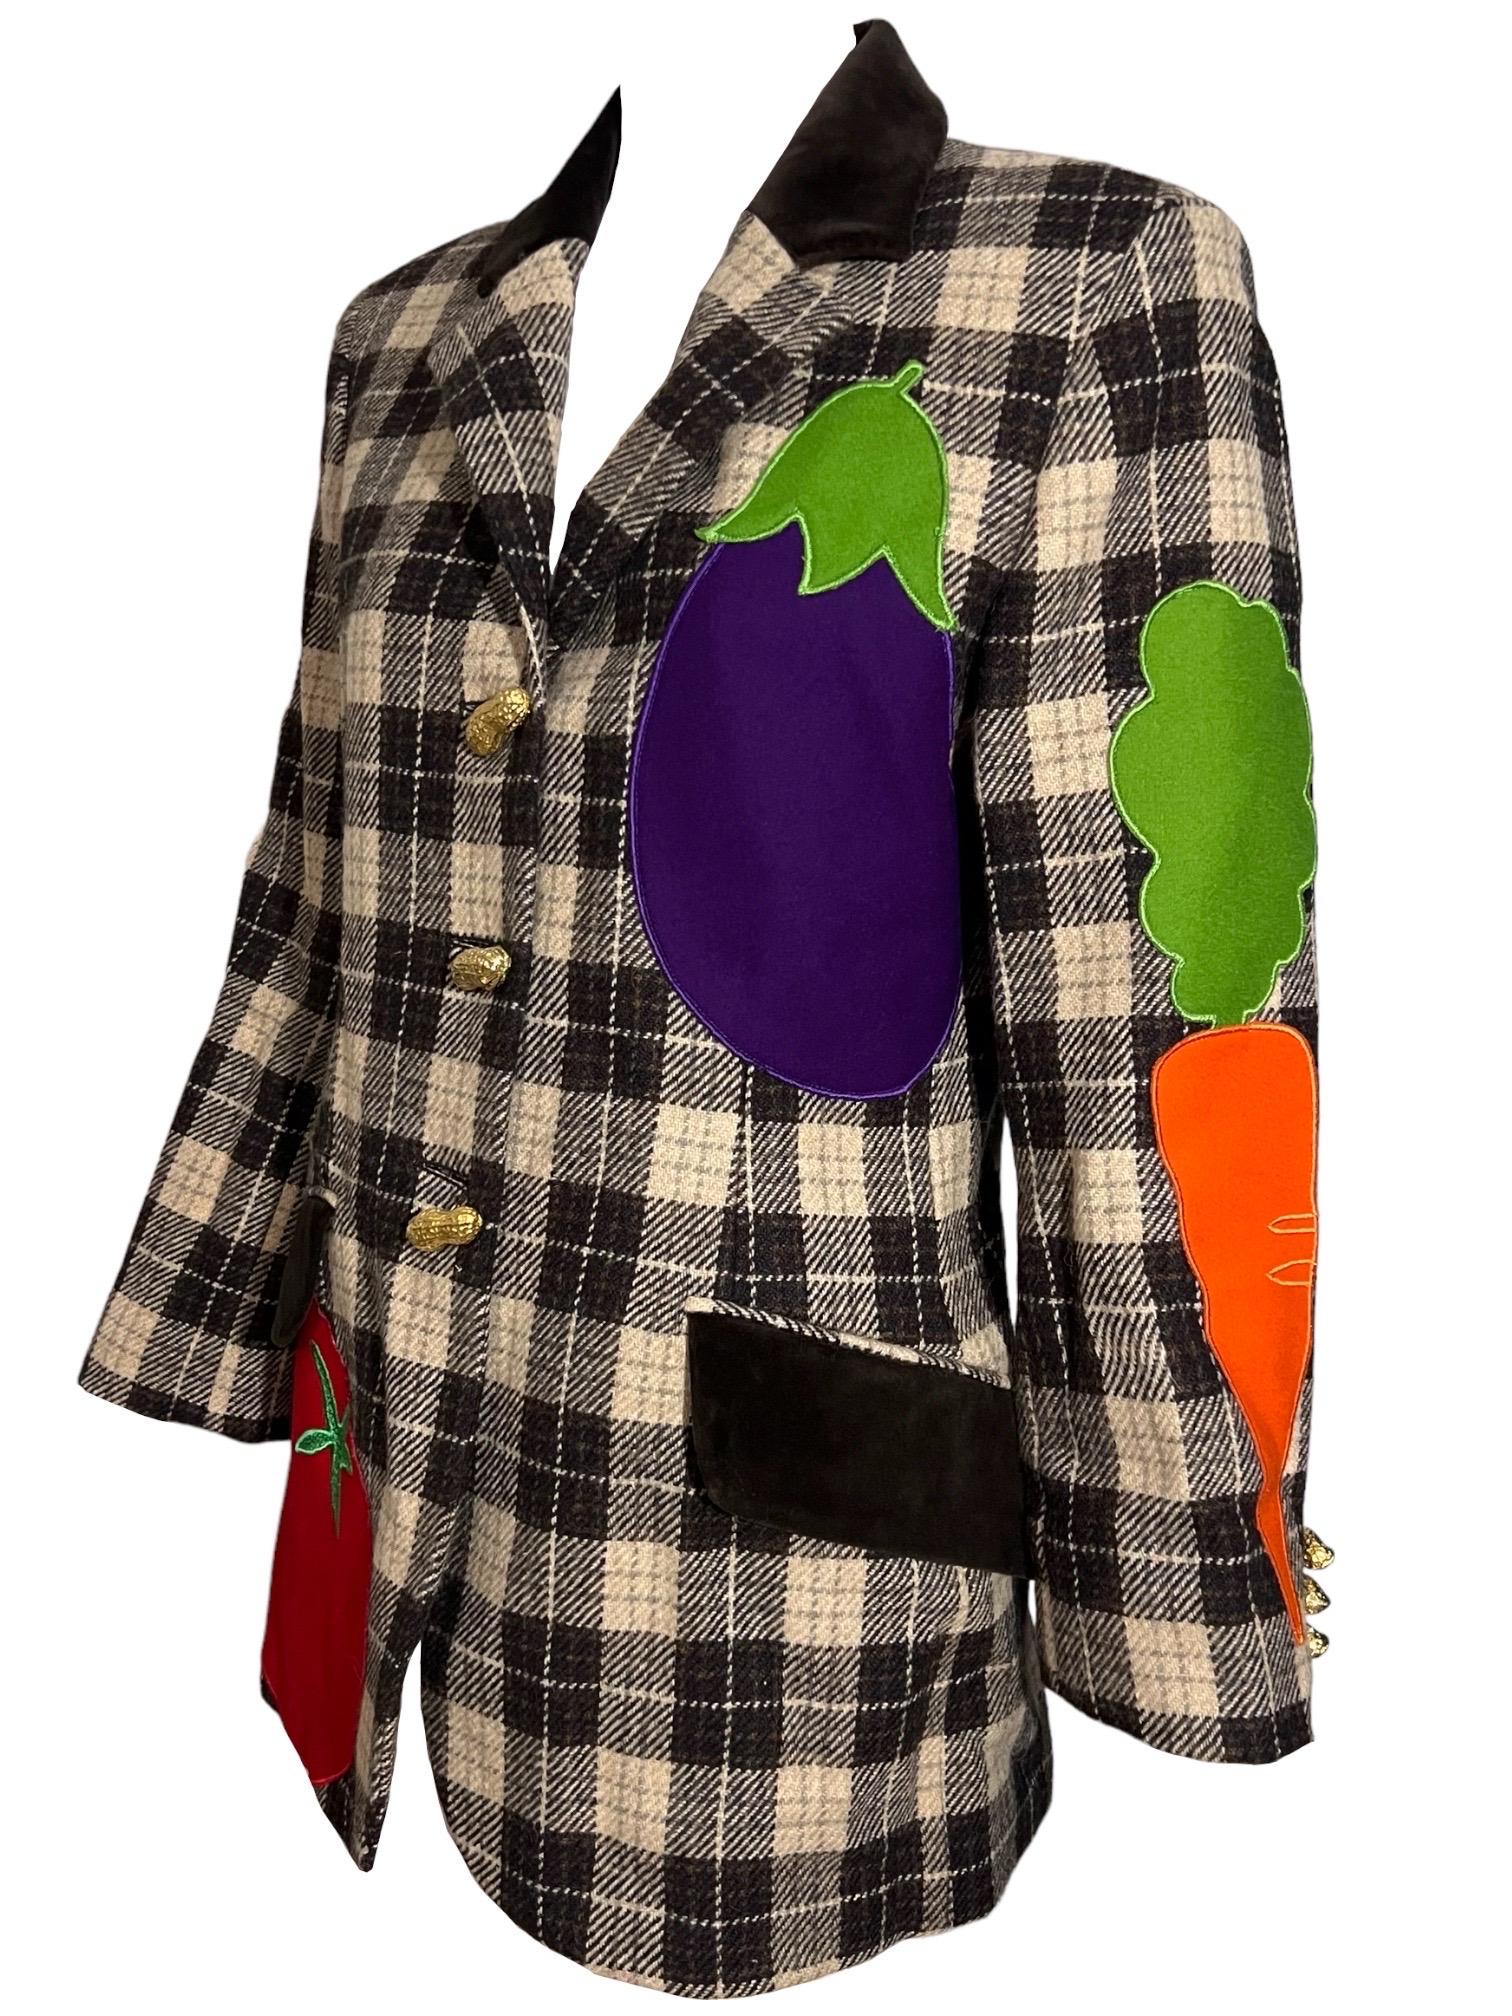 Women's Moschino Cheap & Chic Vintage Vegetable Jacket as seen on the Nanny